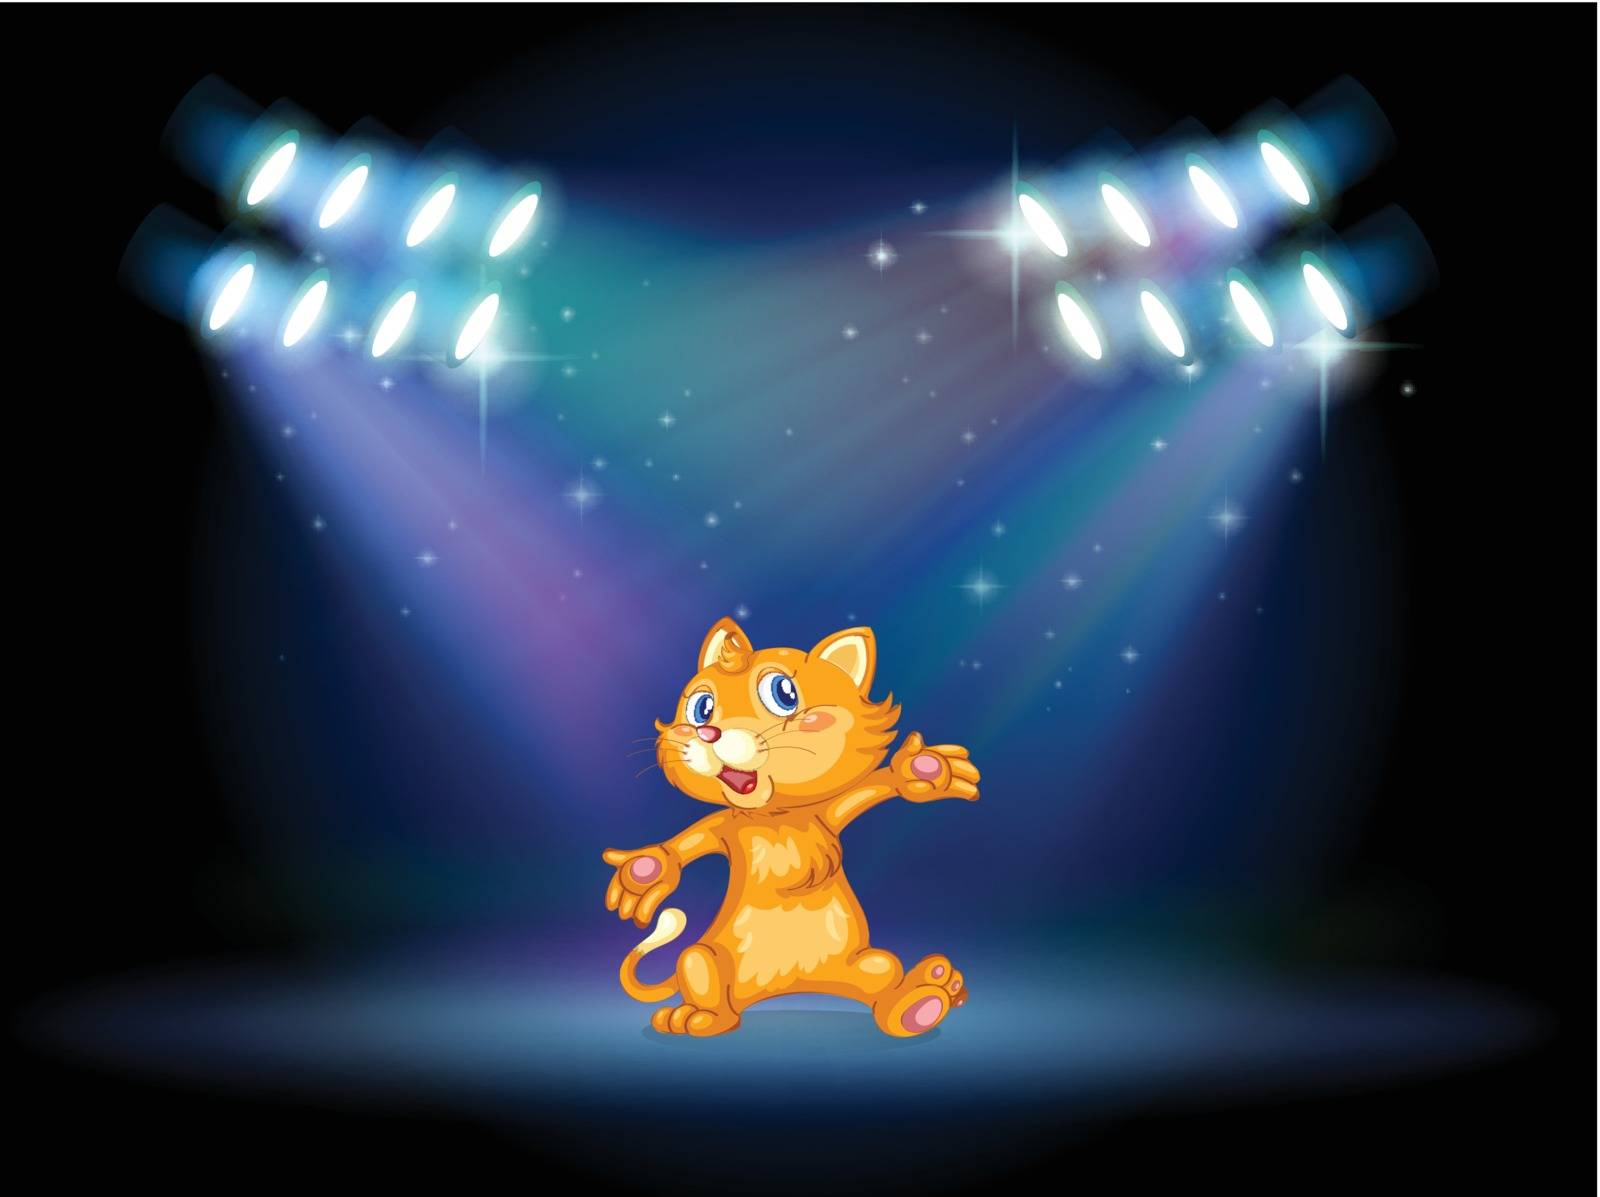 Illustration of a stage with a playful cat